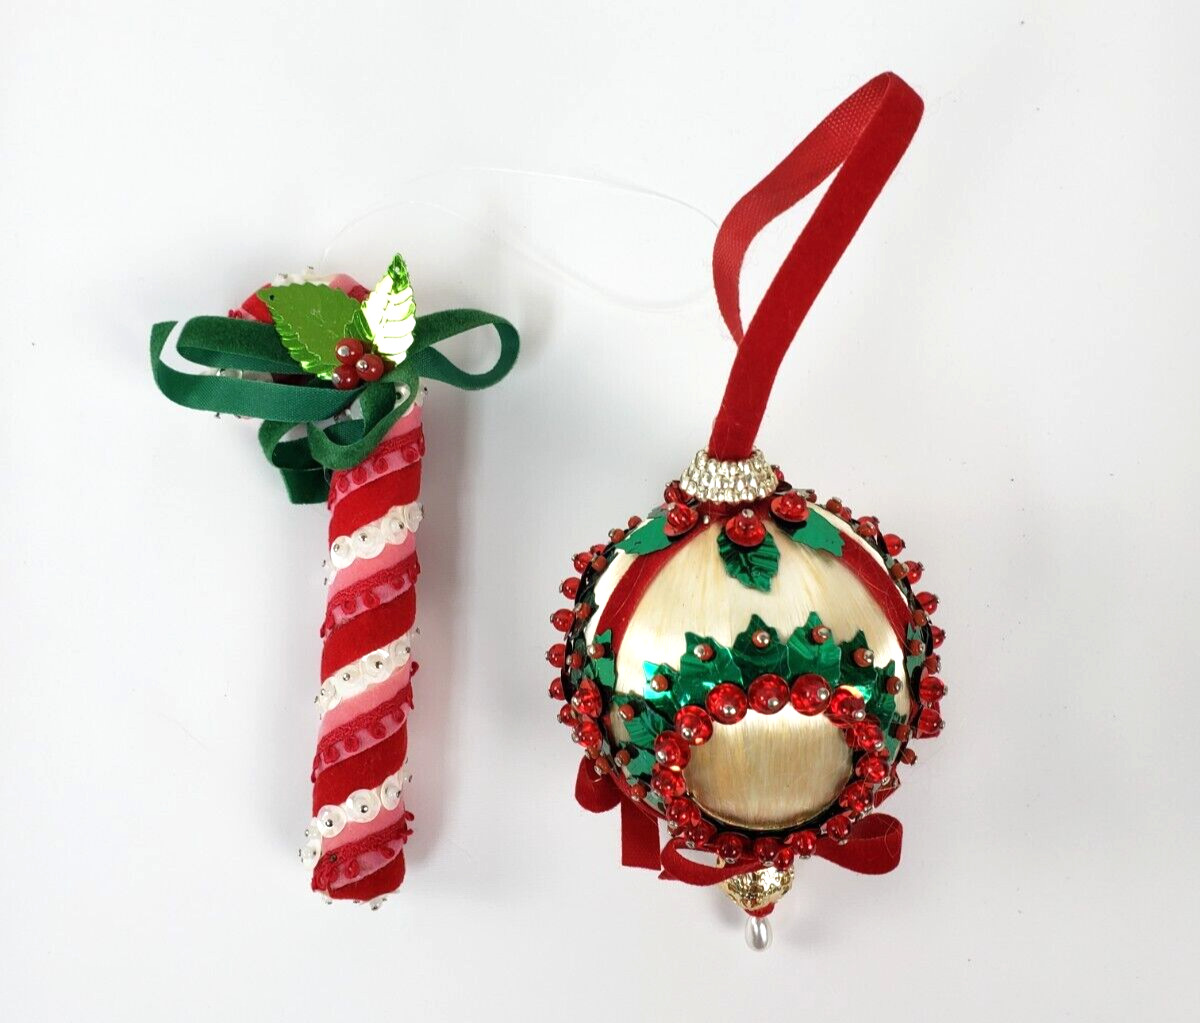 2 Beaded Sequins Felt Ribbon Christmas Ornaments Candy Cane and Ball vintage